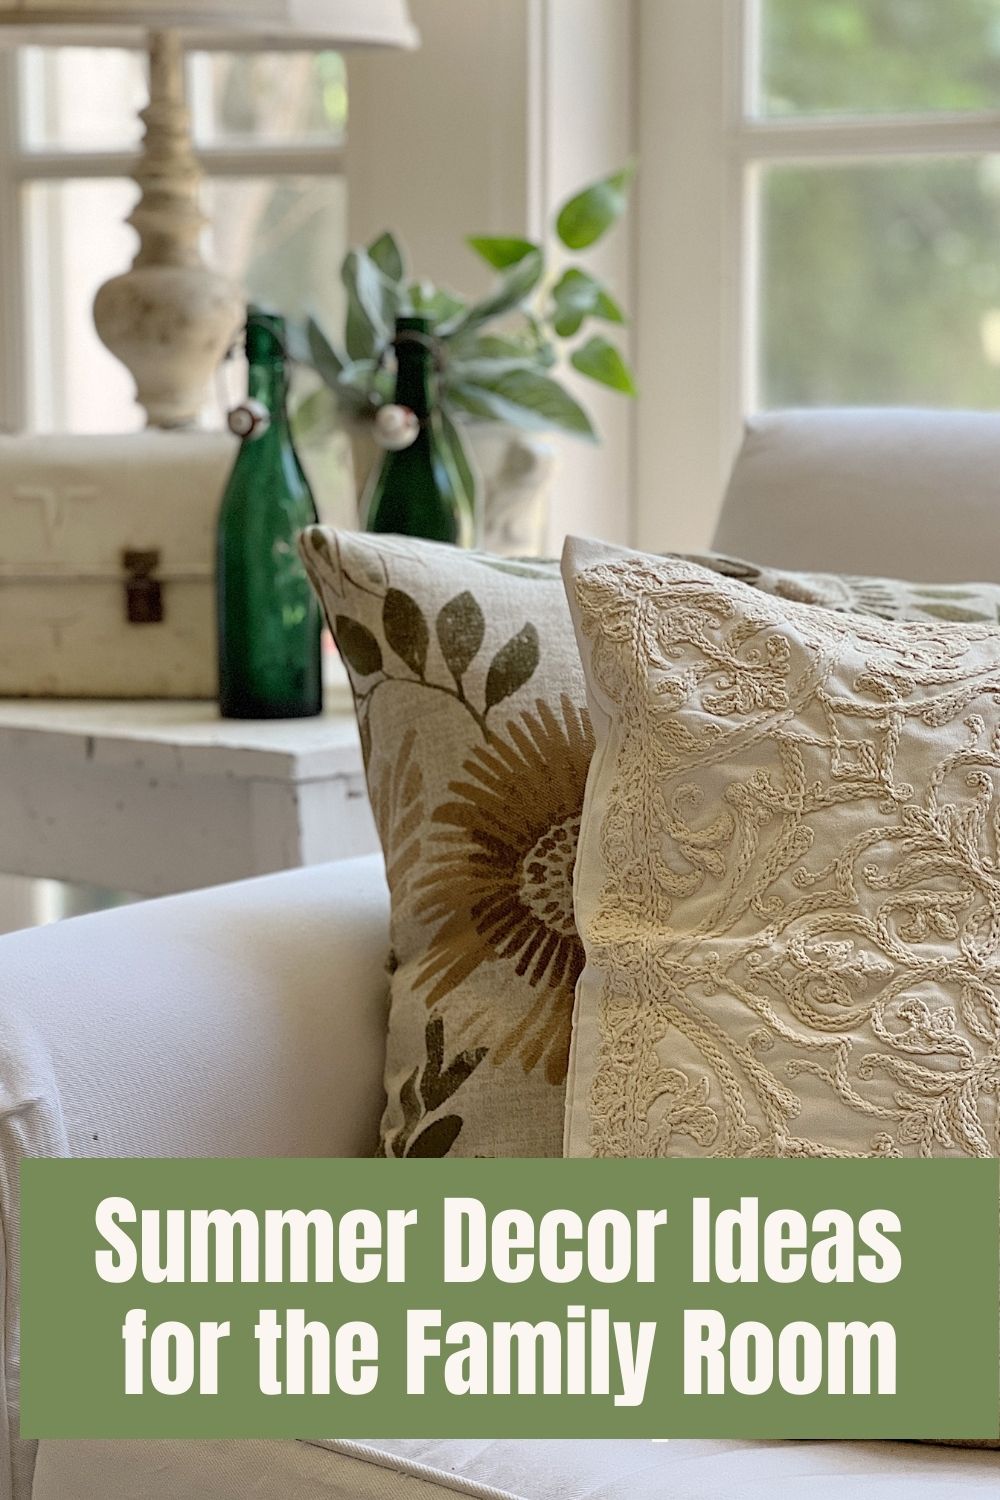 I have refreshed my entire home for summer and today I am sharing some summer decor ideas for the Family Room.